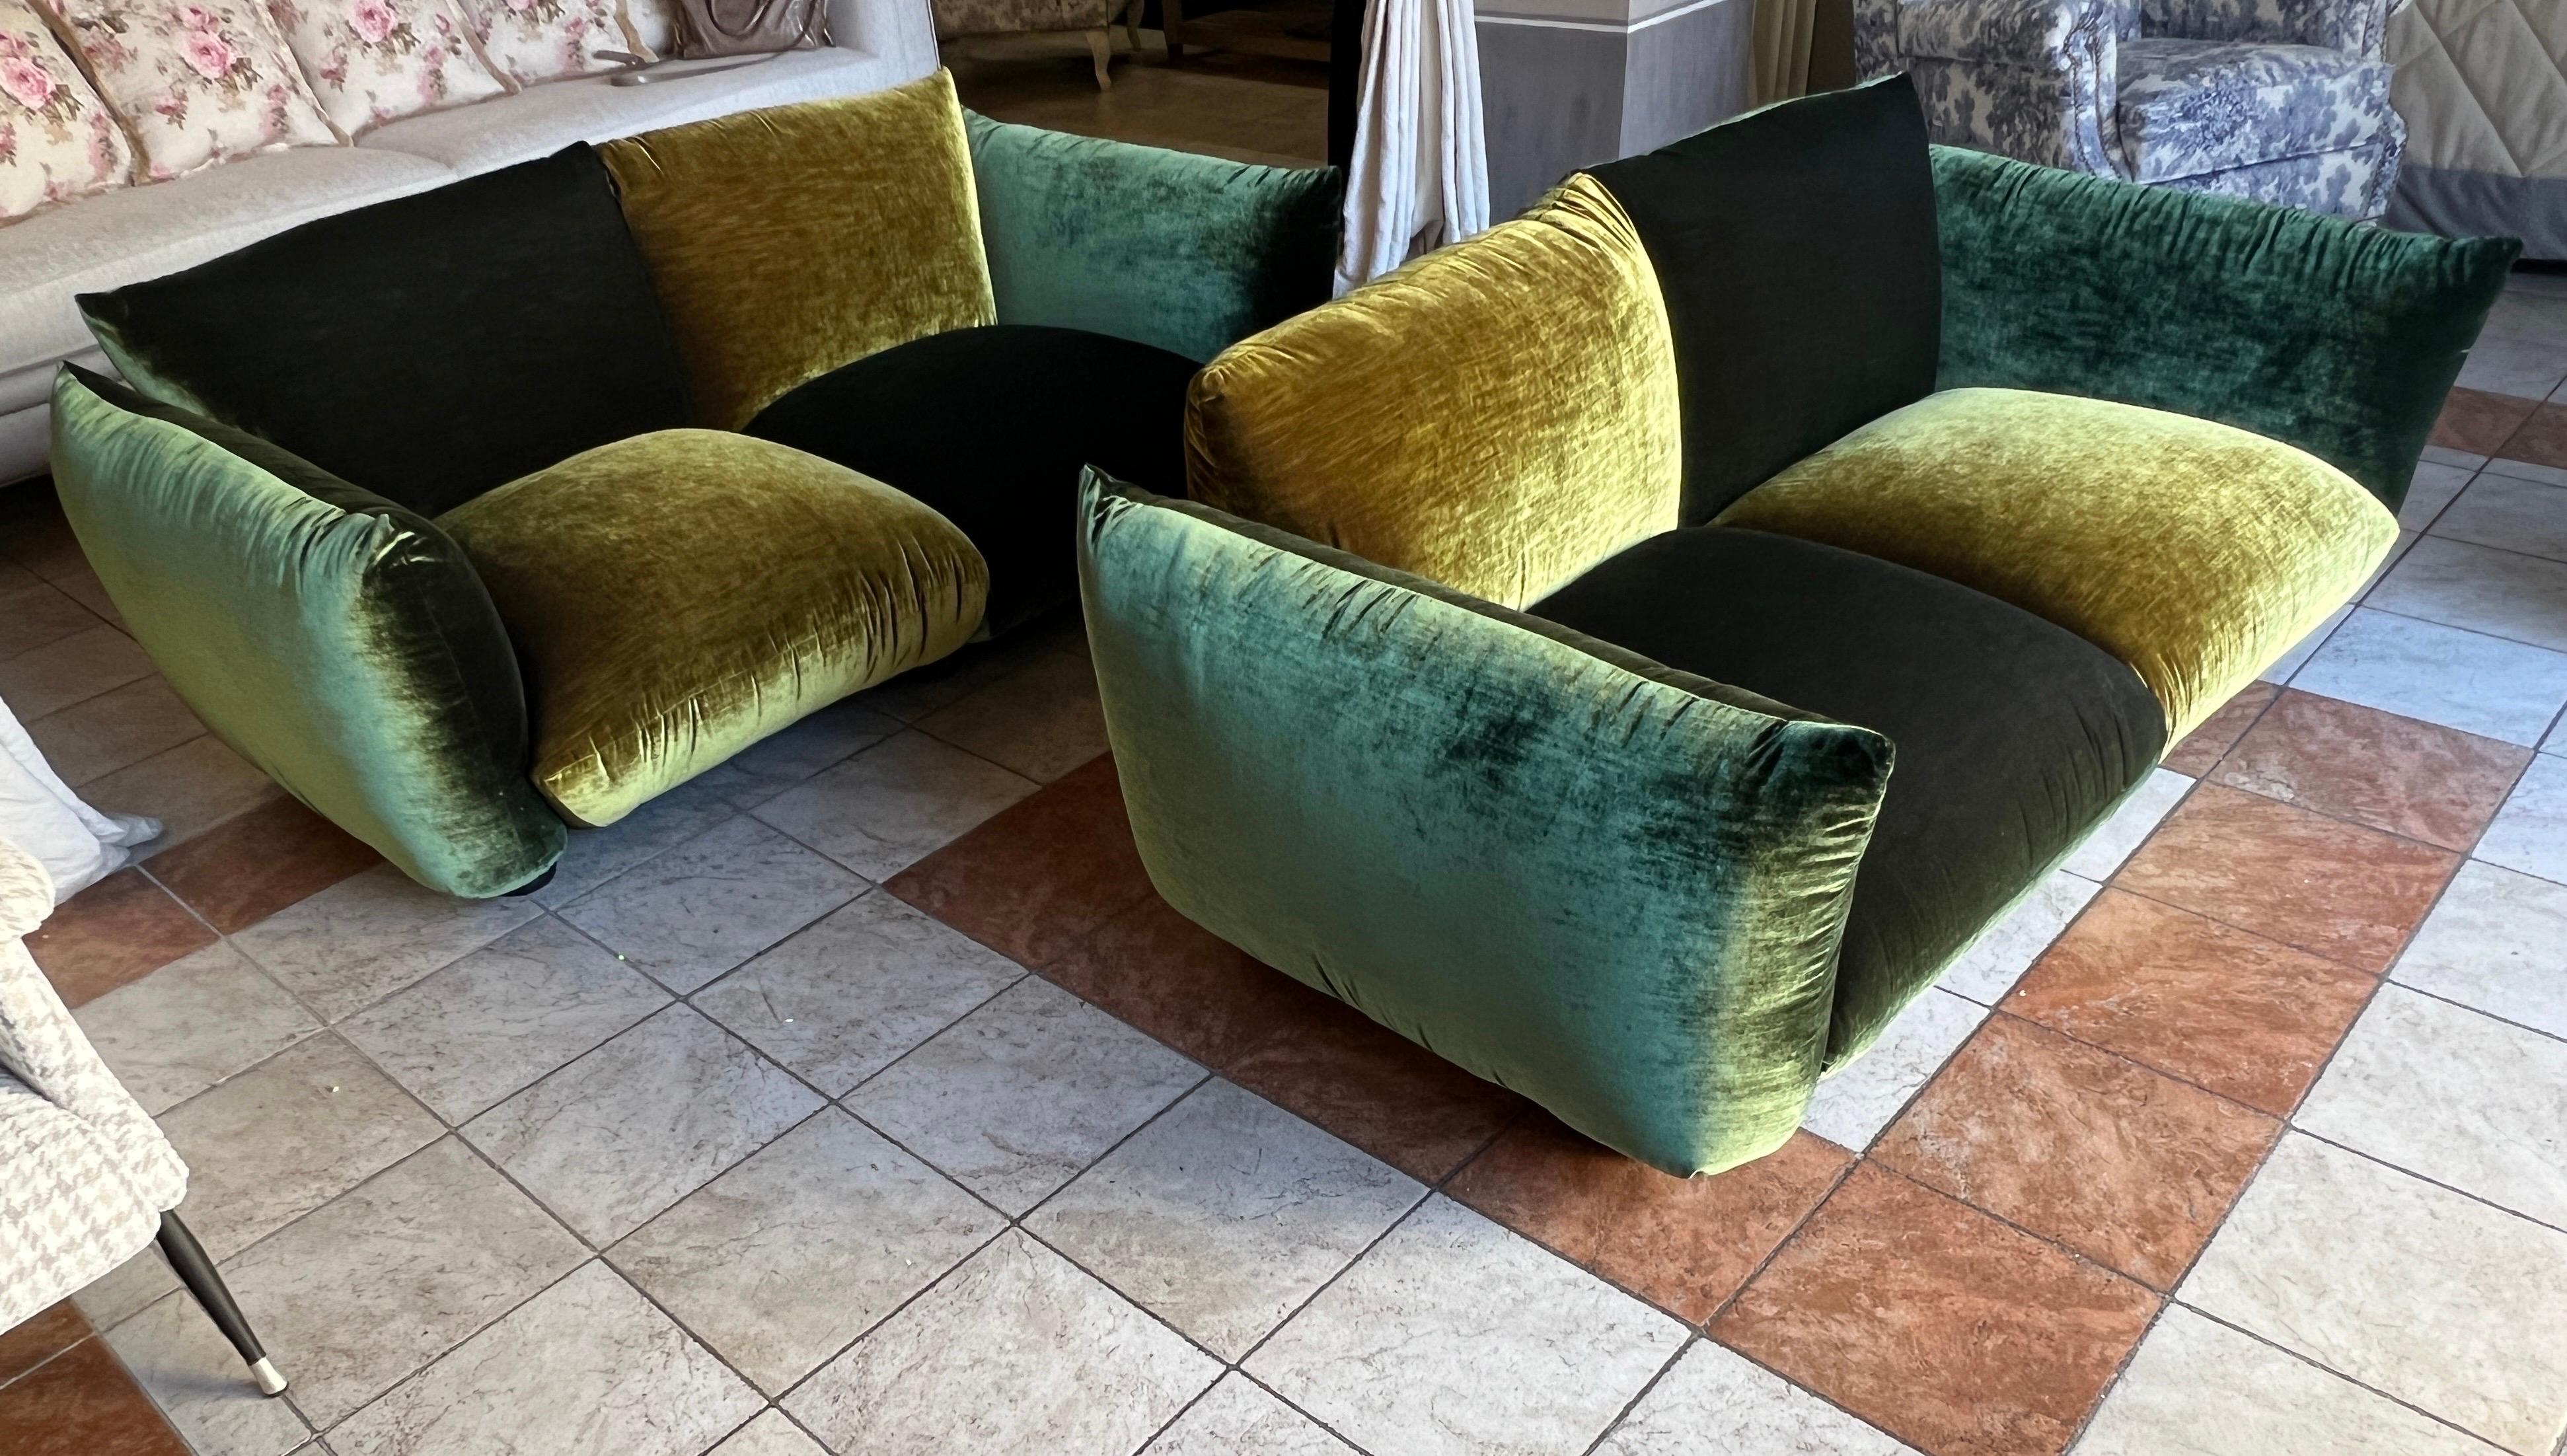 Pair of B&B Sofas Newly Upholstered in Iridescent Acid Green and Green Velvet, mirrored checkerboard effect.
Can be sold individually.